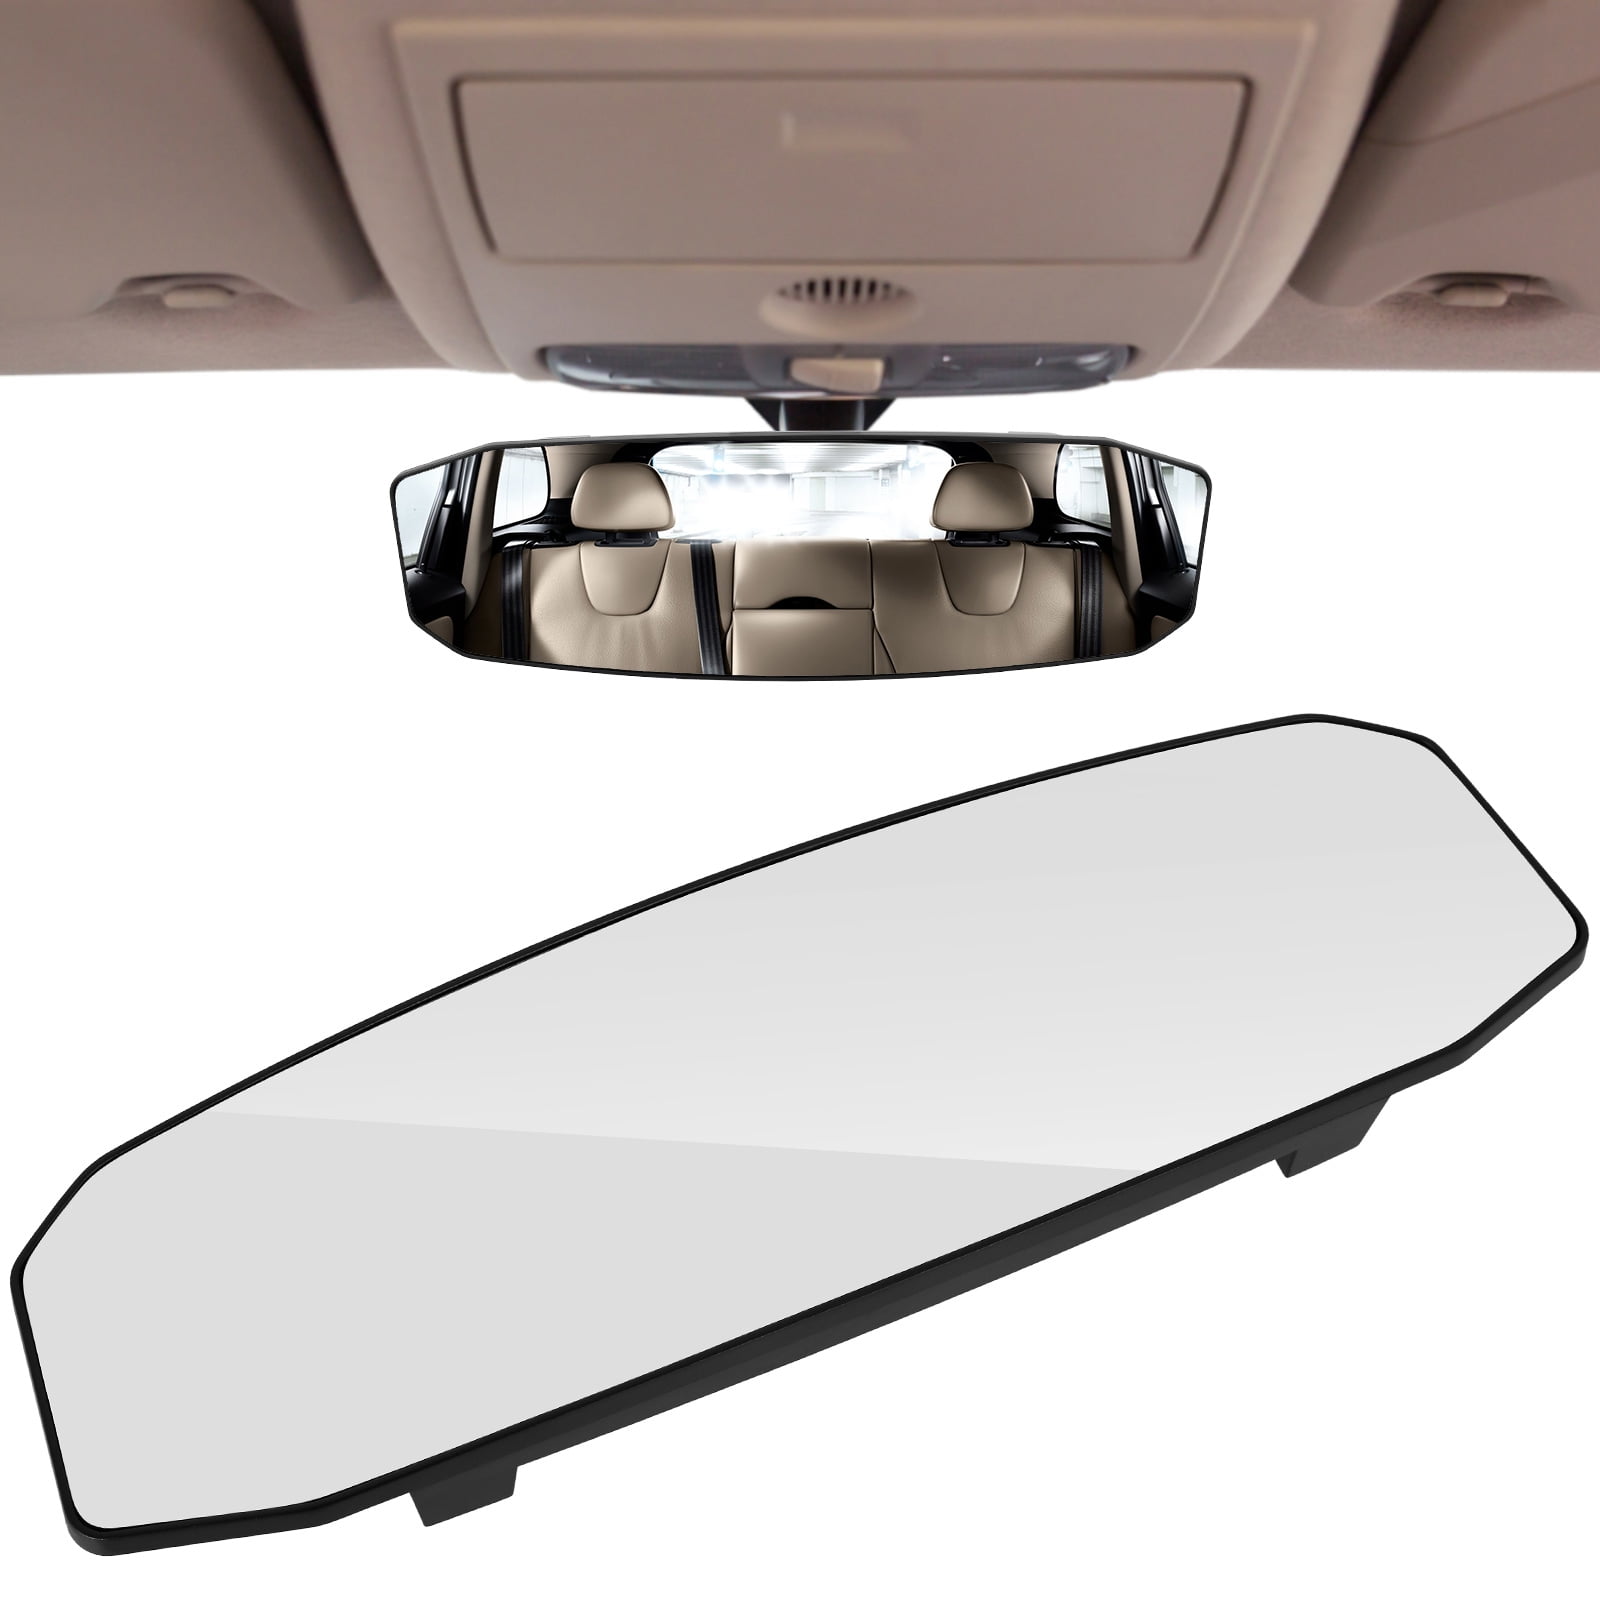 Bling Car Rear View Mirror, Universal 11.81 inch Panoramic Rearview Mirror Accessories